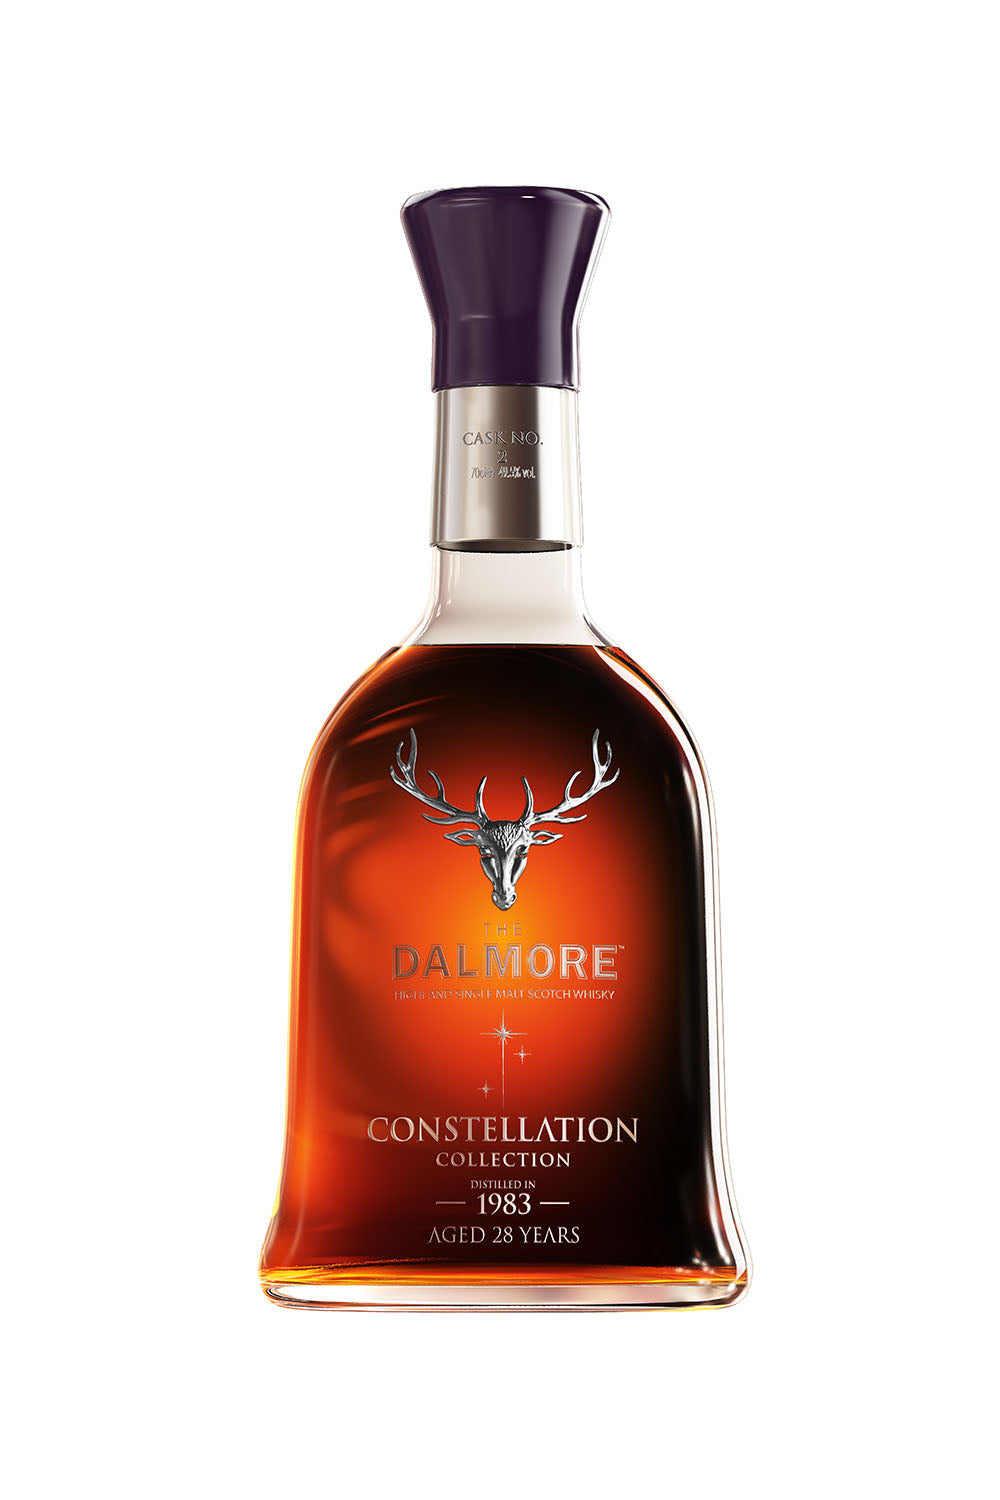 The Dalmore 1983 Constellation - Cask 2